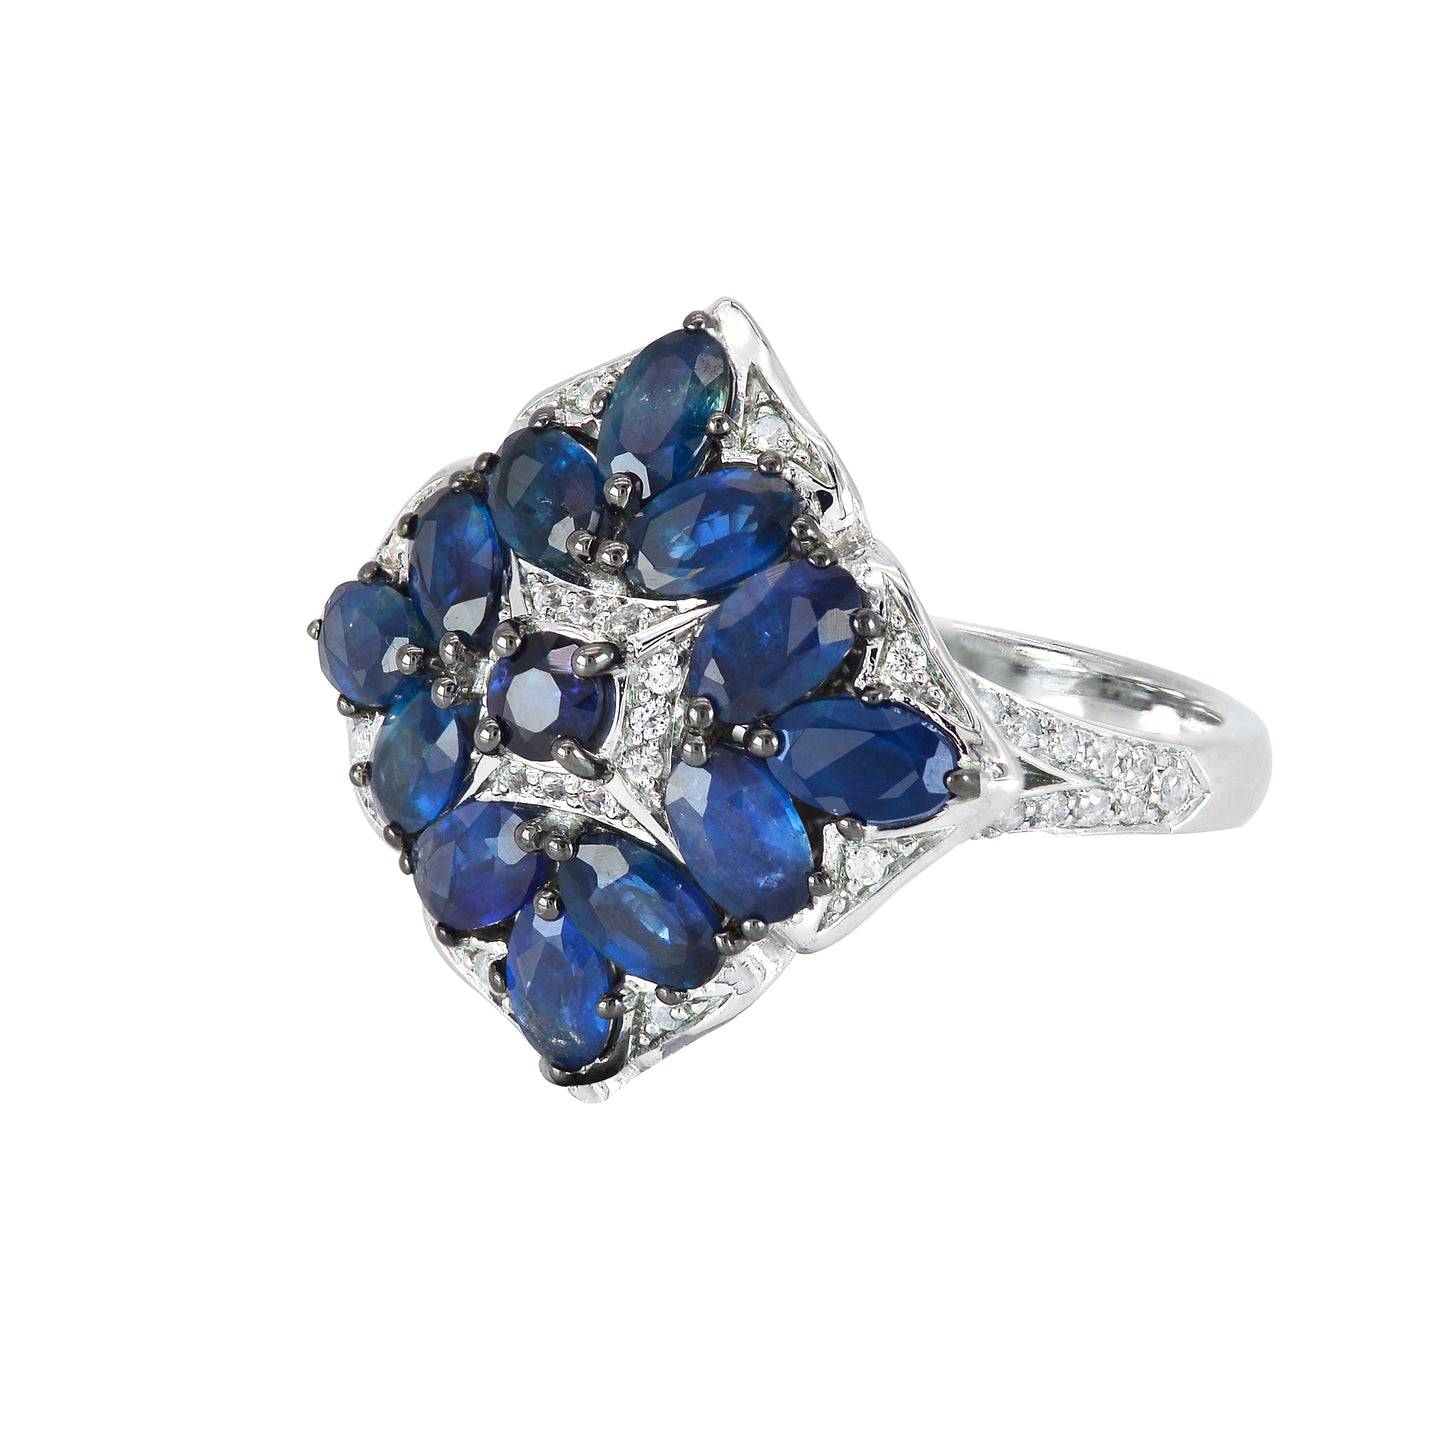 Stand out and Shine - Sapphire Cushion Ring